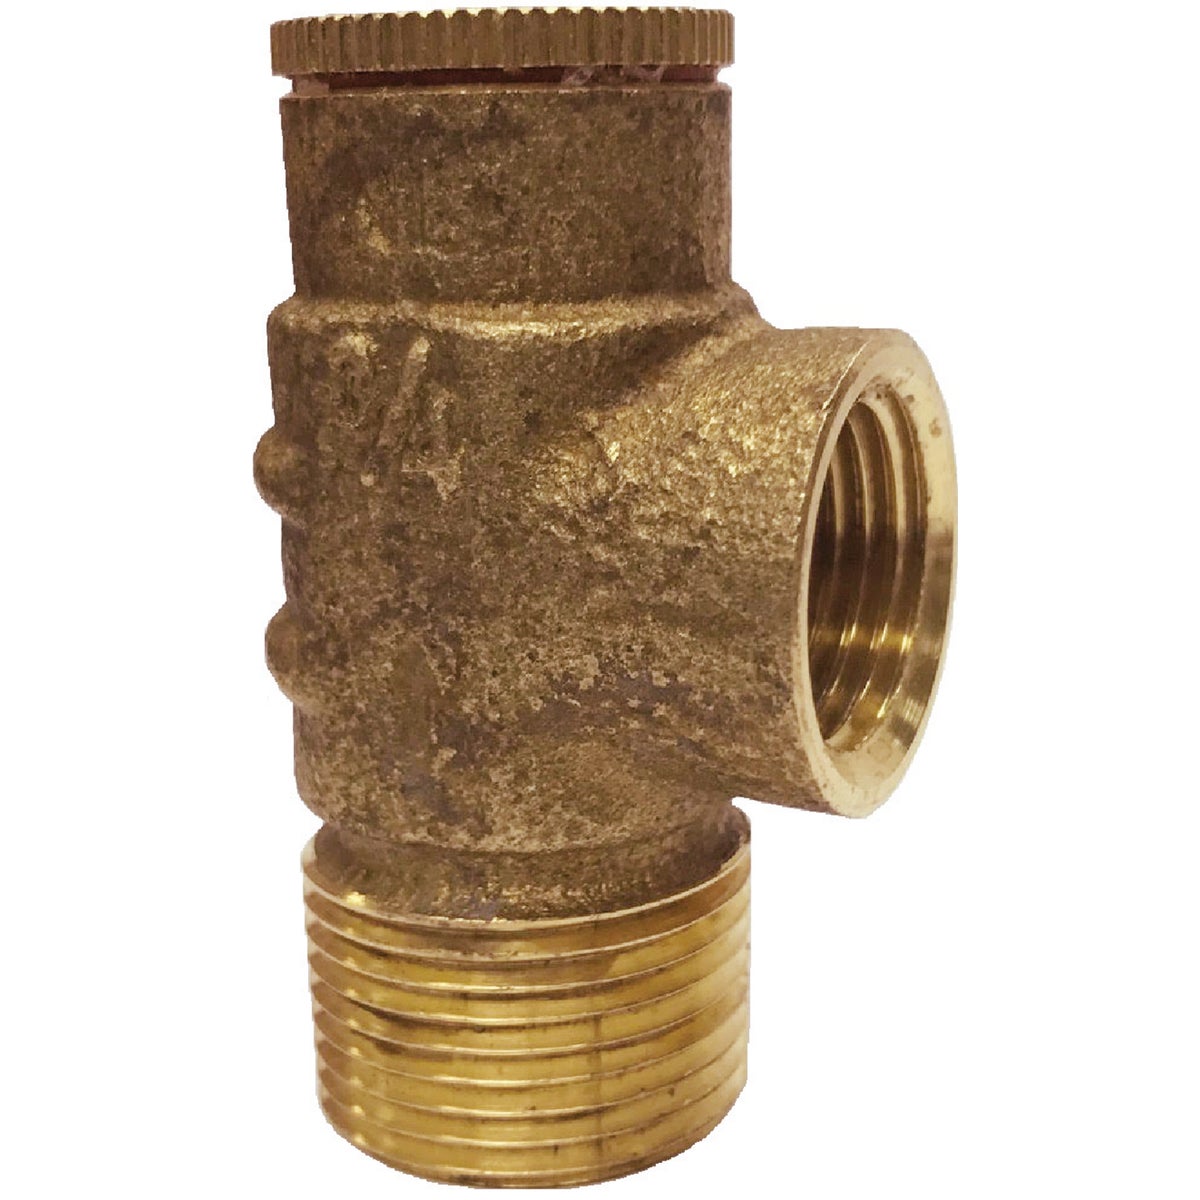 Item 404641, 3/4 In. pressure only relief valve. Cast brass finish.